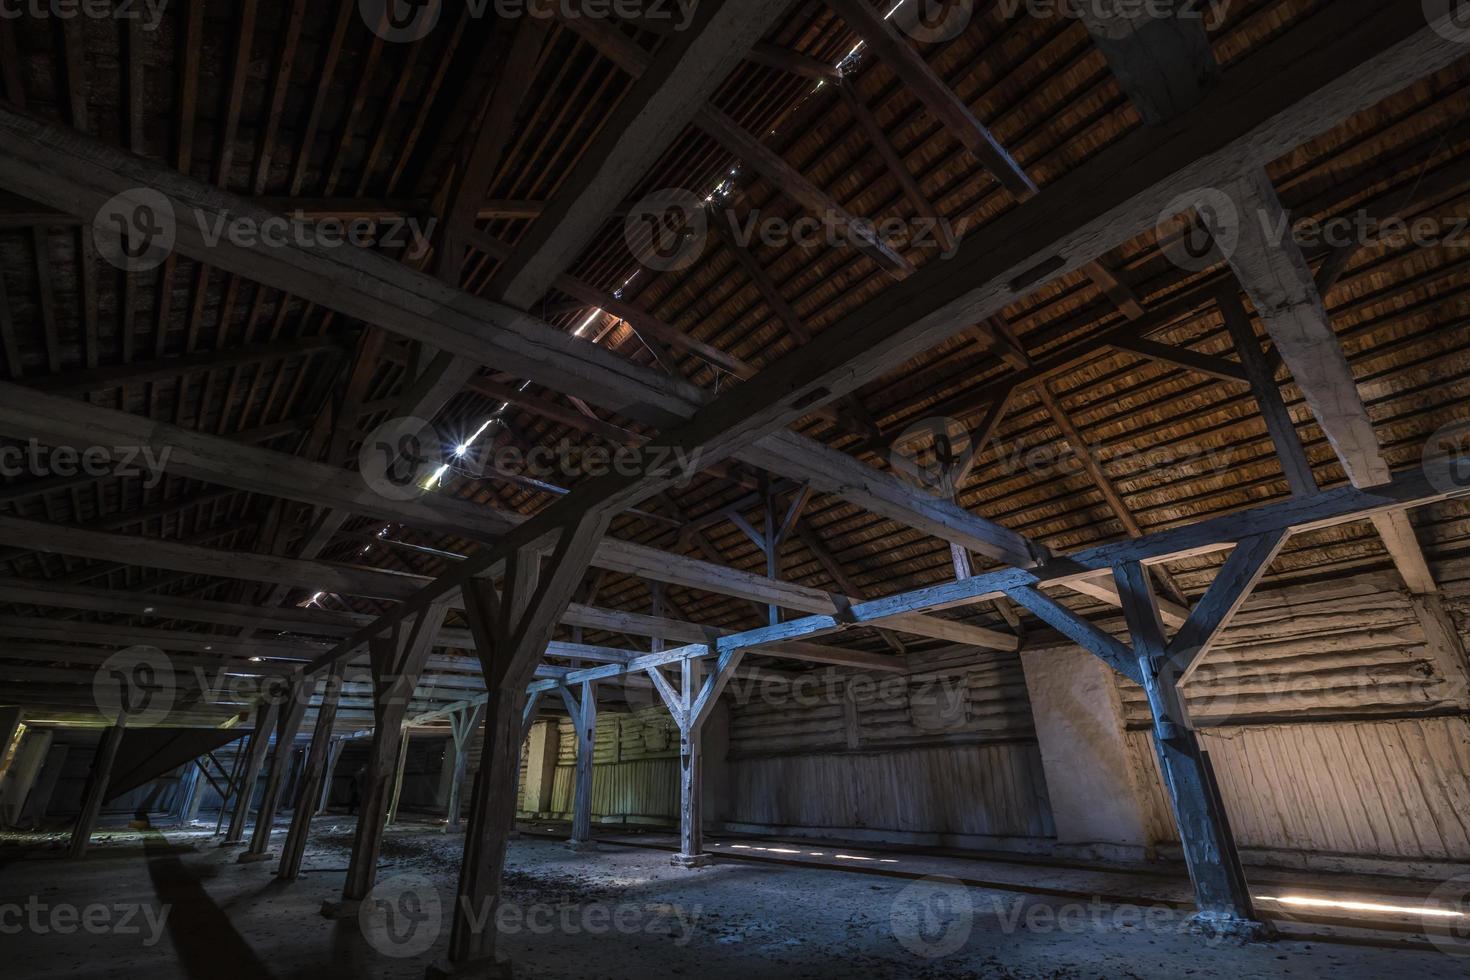 inside dark abandoned ruined wooden decaying hangar with rotting columns photo